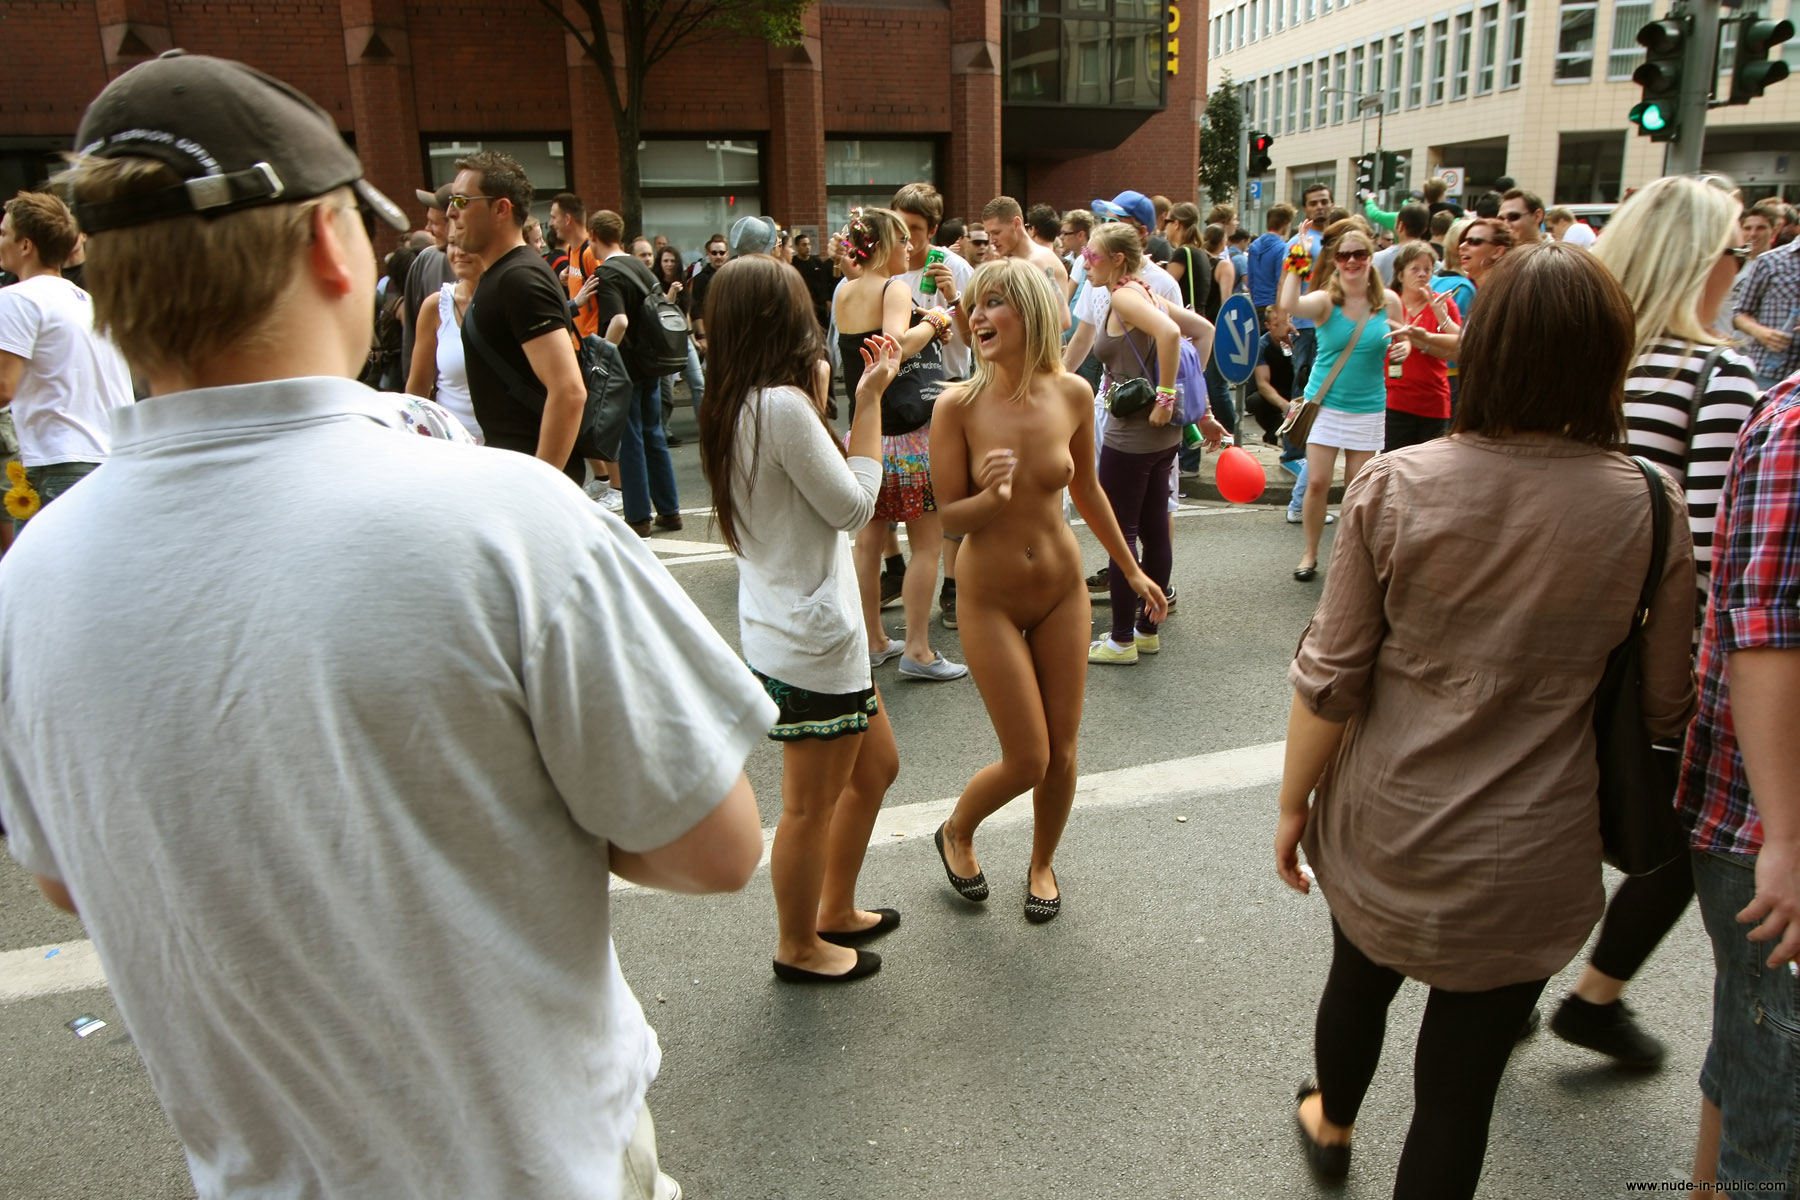 Naked in a crowd